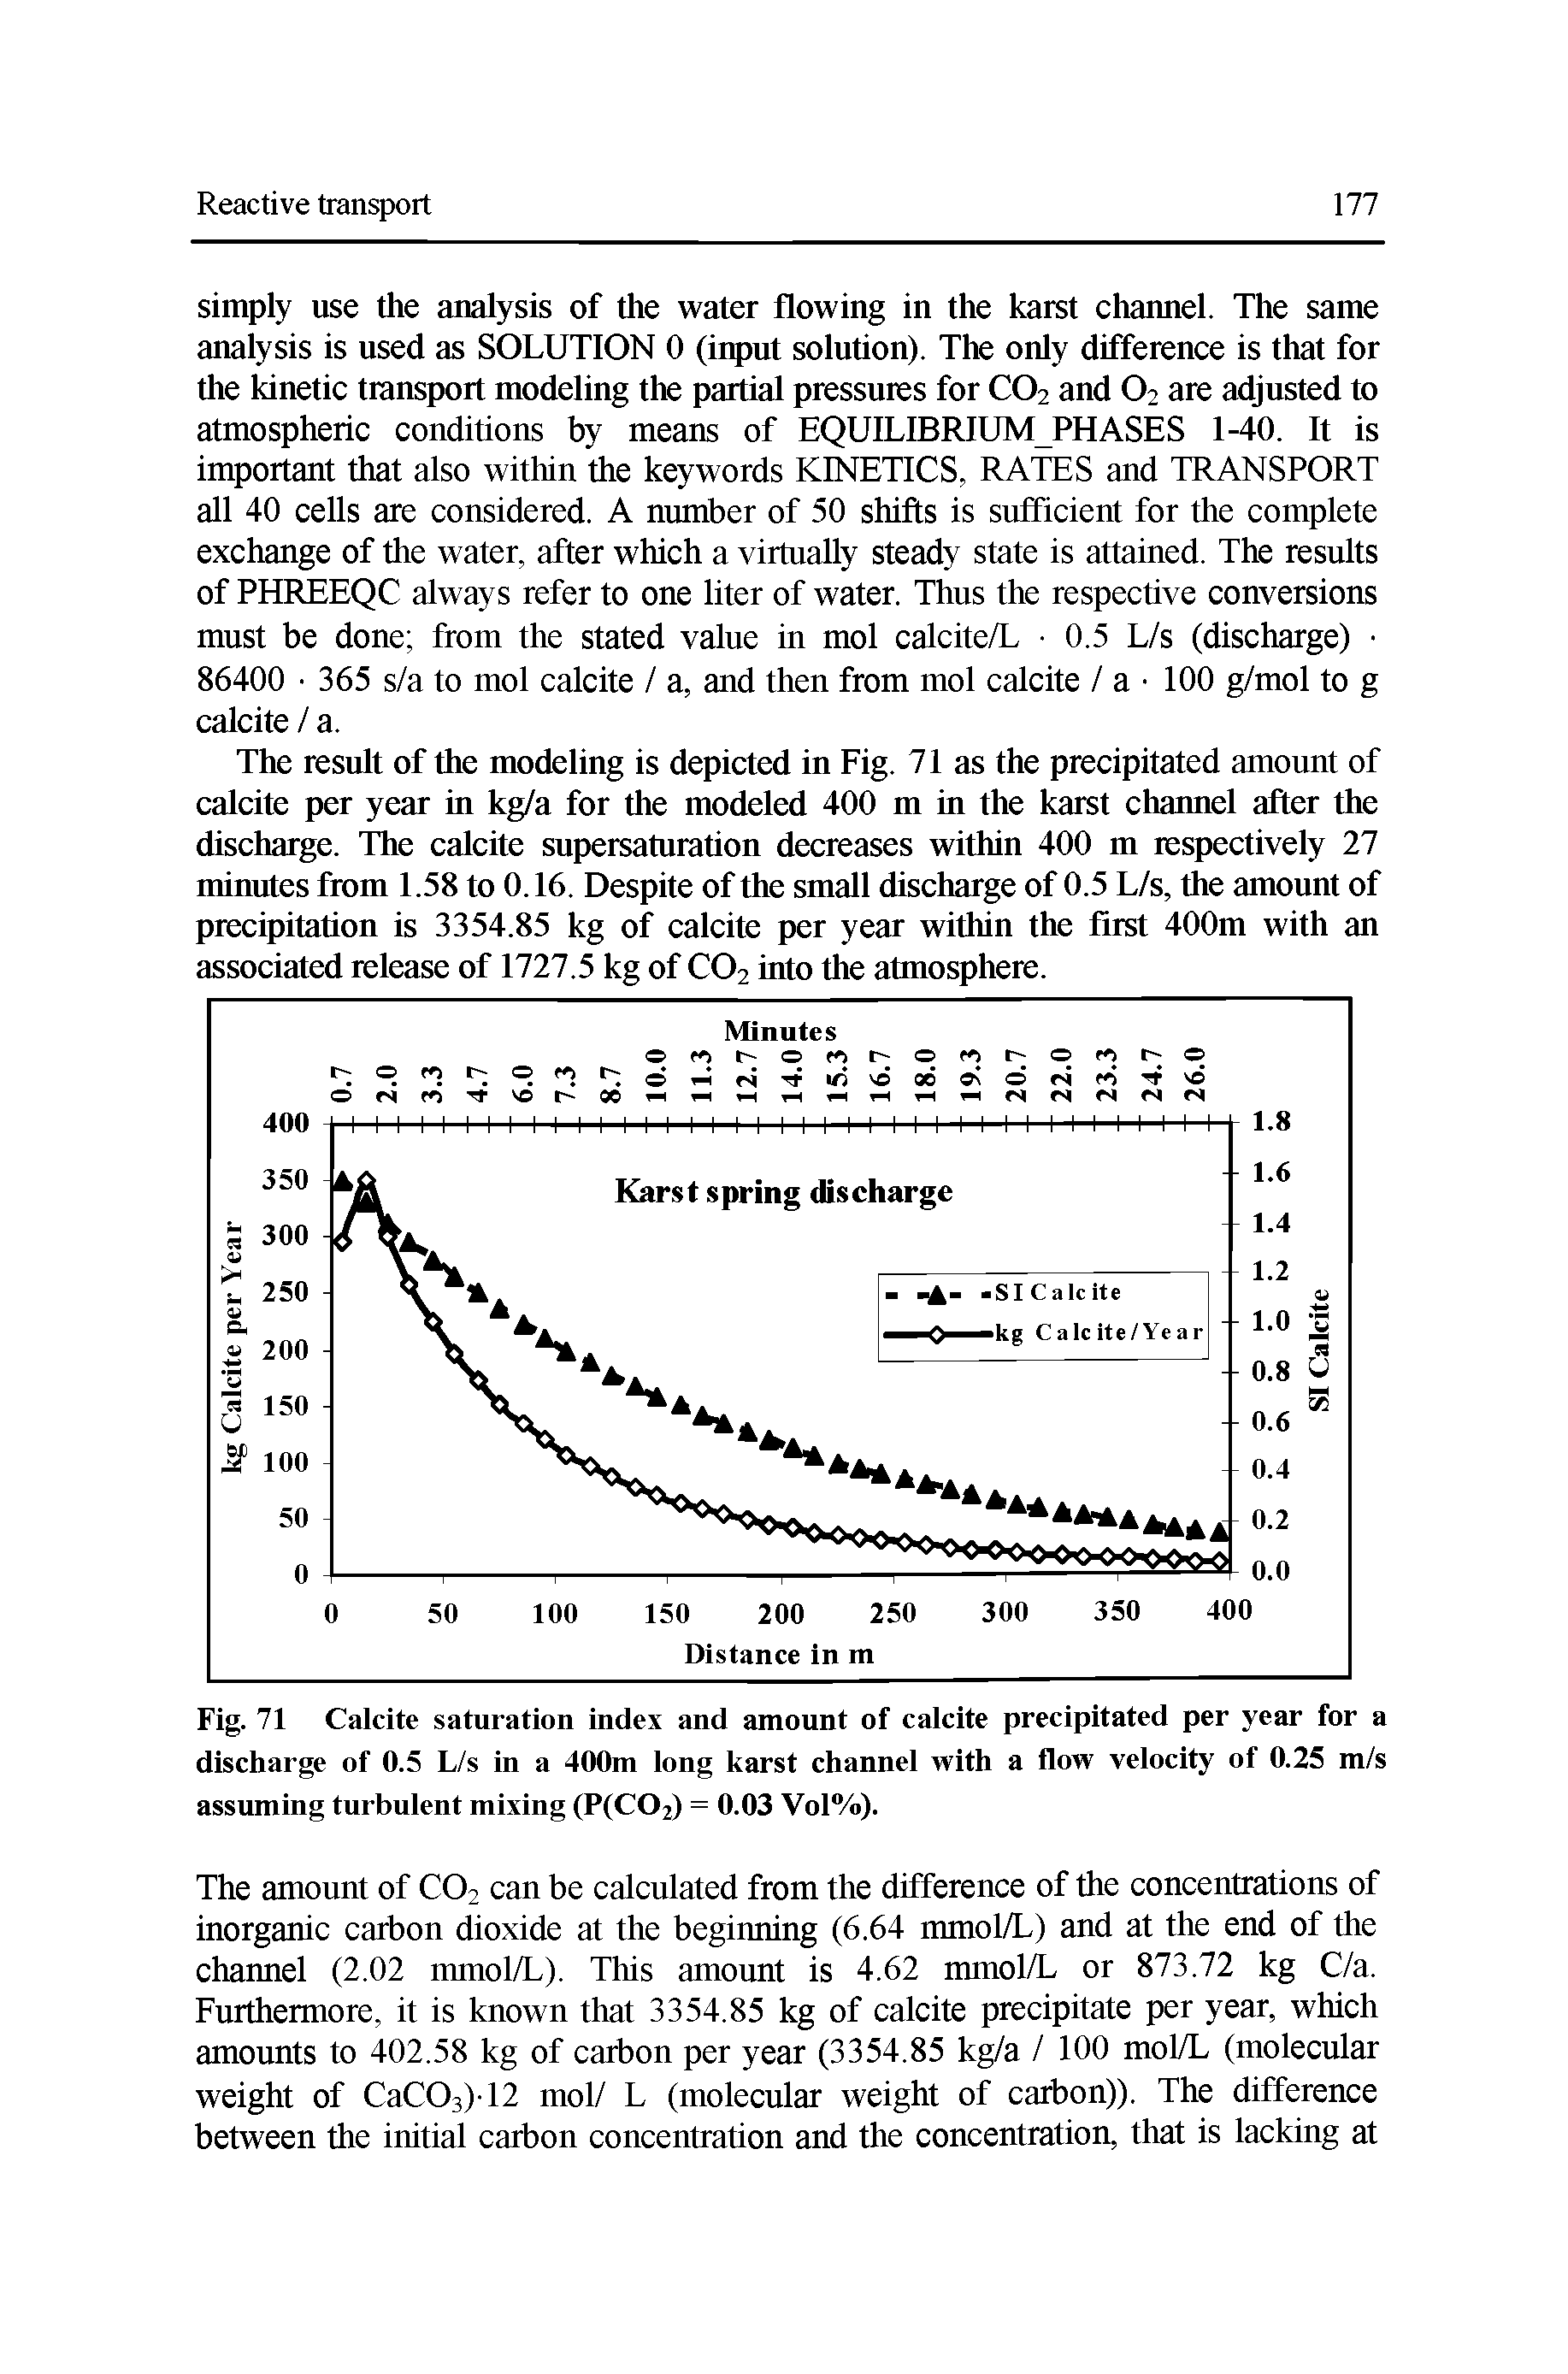 Fig. 71 Calcite saturation index and amount of calcite precipitated per year for a discharge of 0.5 L/s in a 400m long karst channel with a flow velocity of 0.25 m/s assuming turbulent mixing (P(C02) = 0.03 Vol%).